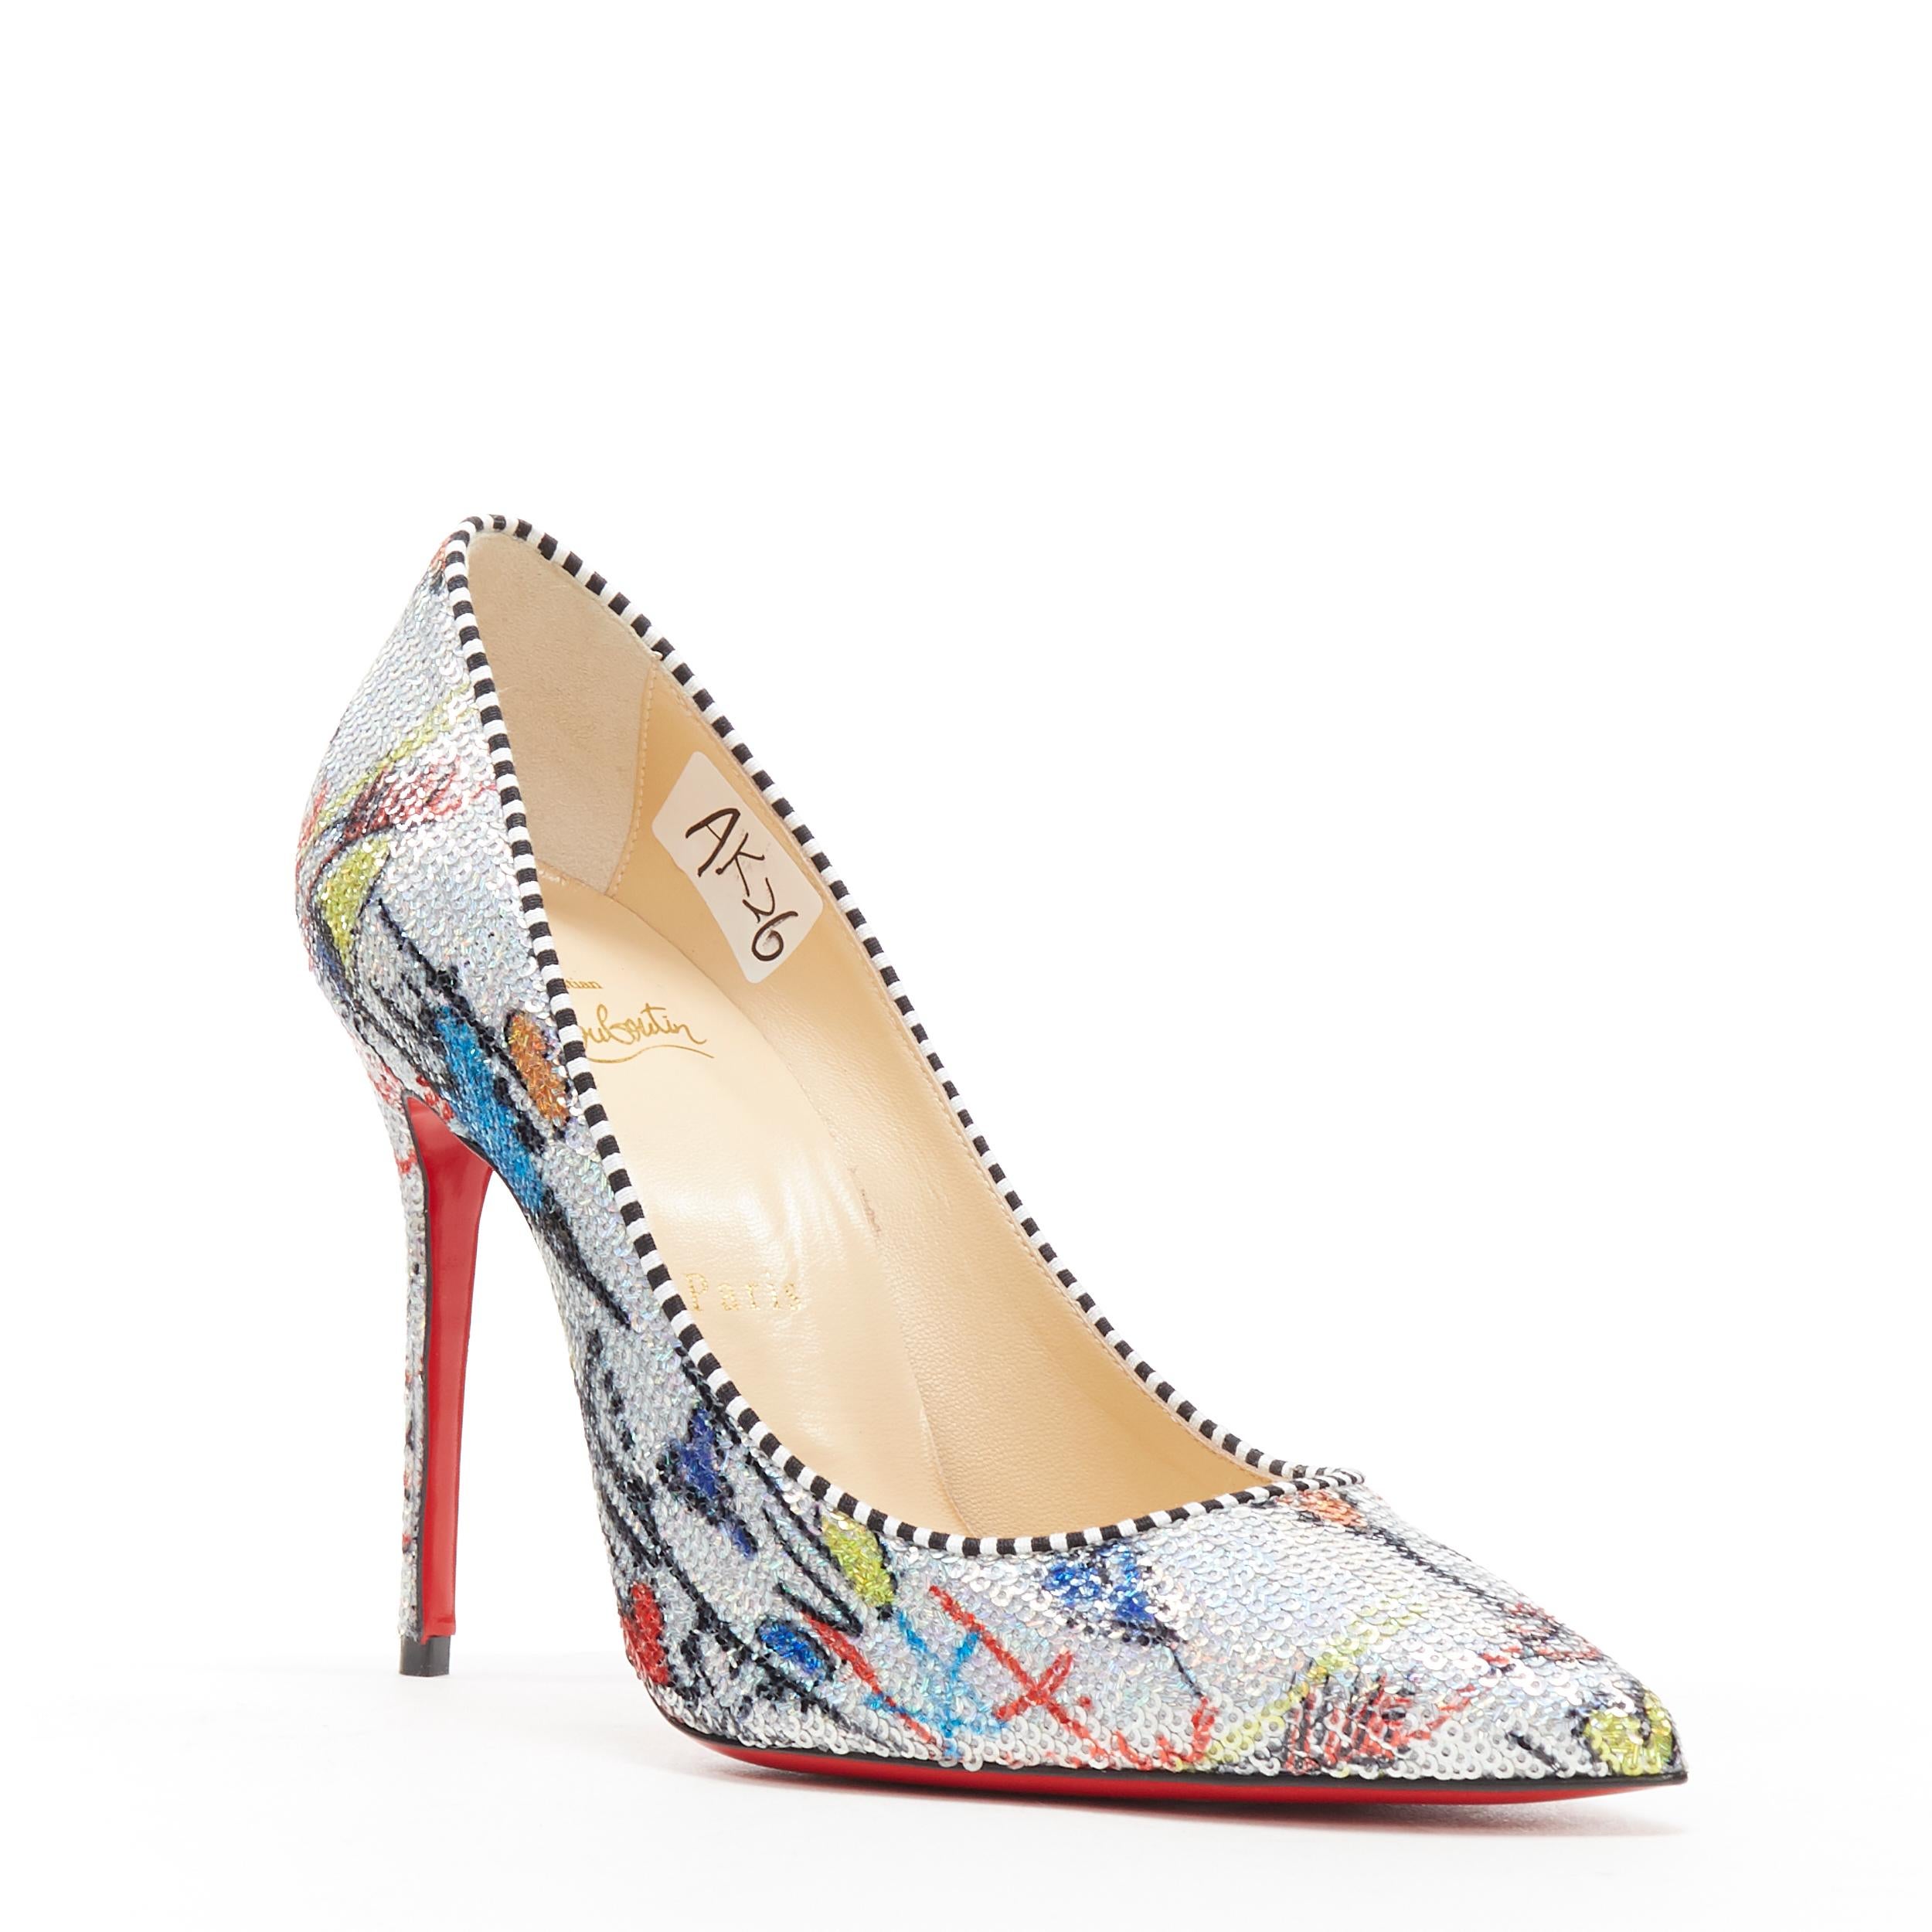 new CHRISTIAN LOUBOUTIN Kate 100 Paillette Lou silver illustration pump EU38
Brand: Christian Louboutin
Designer: Christian Louboutin
Model Name / Style: Kate 100
Material: Leather
Color: Silver
Pattern: Abstract
Extra Detail: Style code: